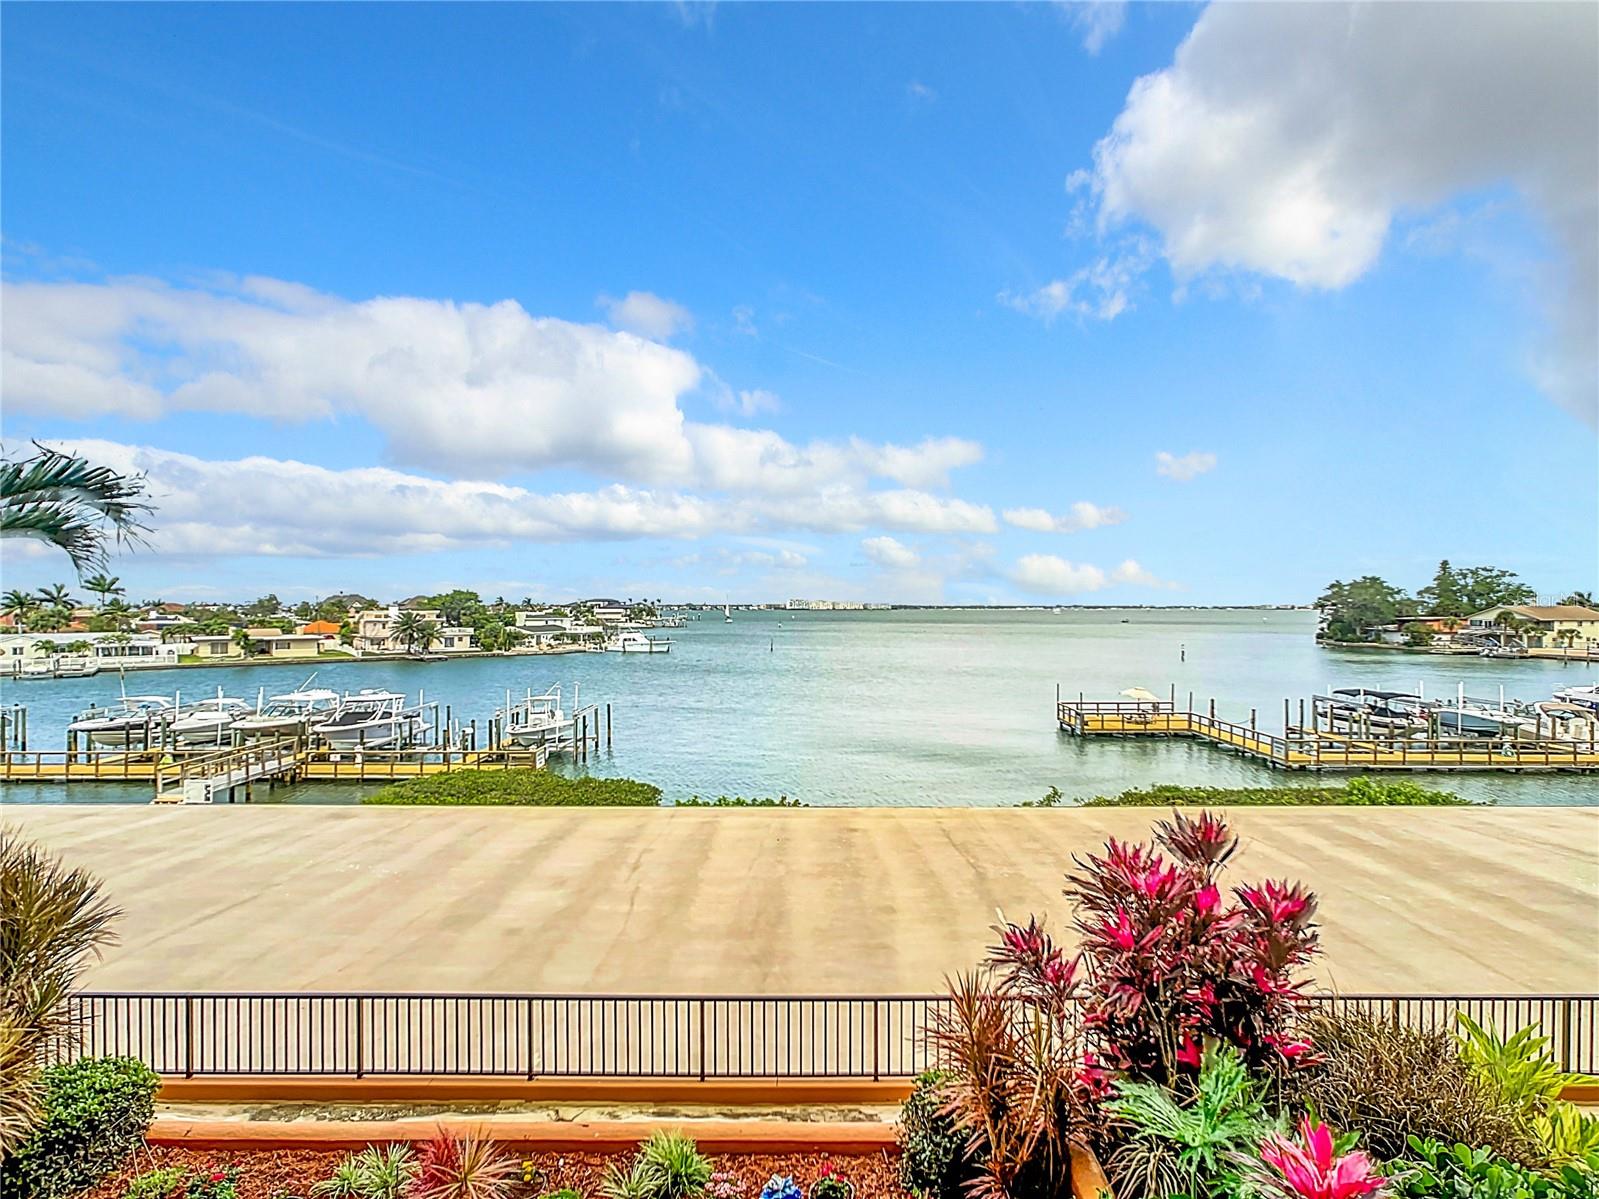 What a perfect view - looking straight out to Boca Ciega Bay and the Intracoastal Waterway